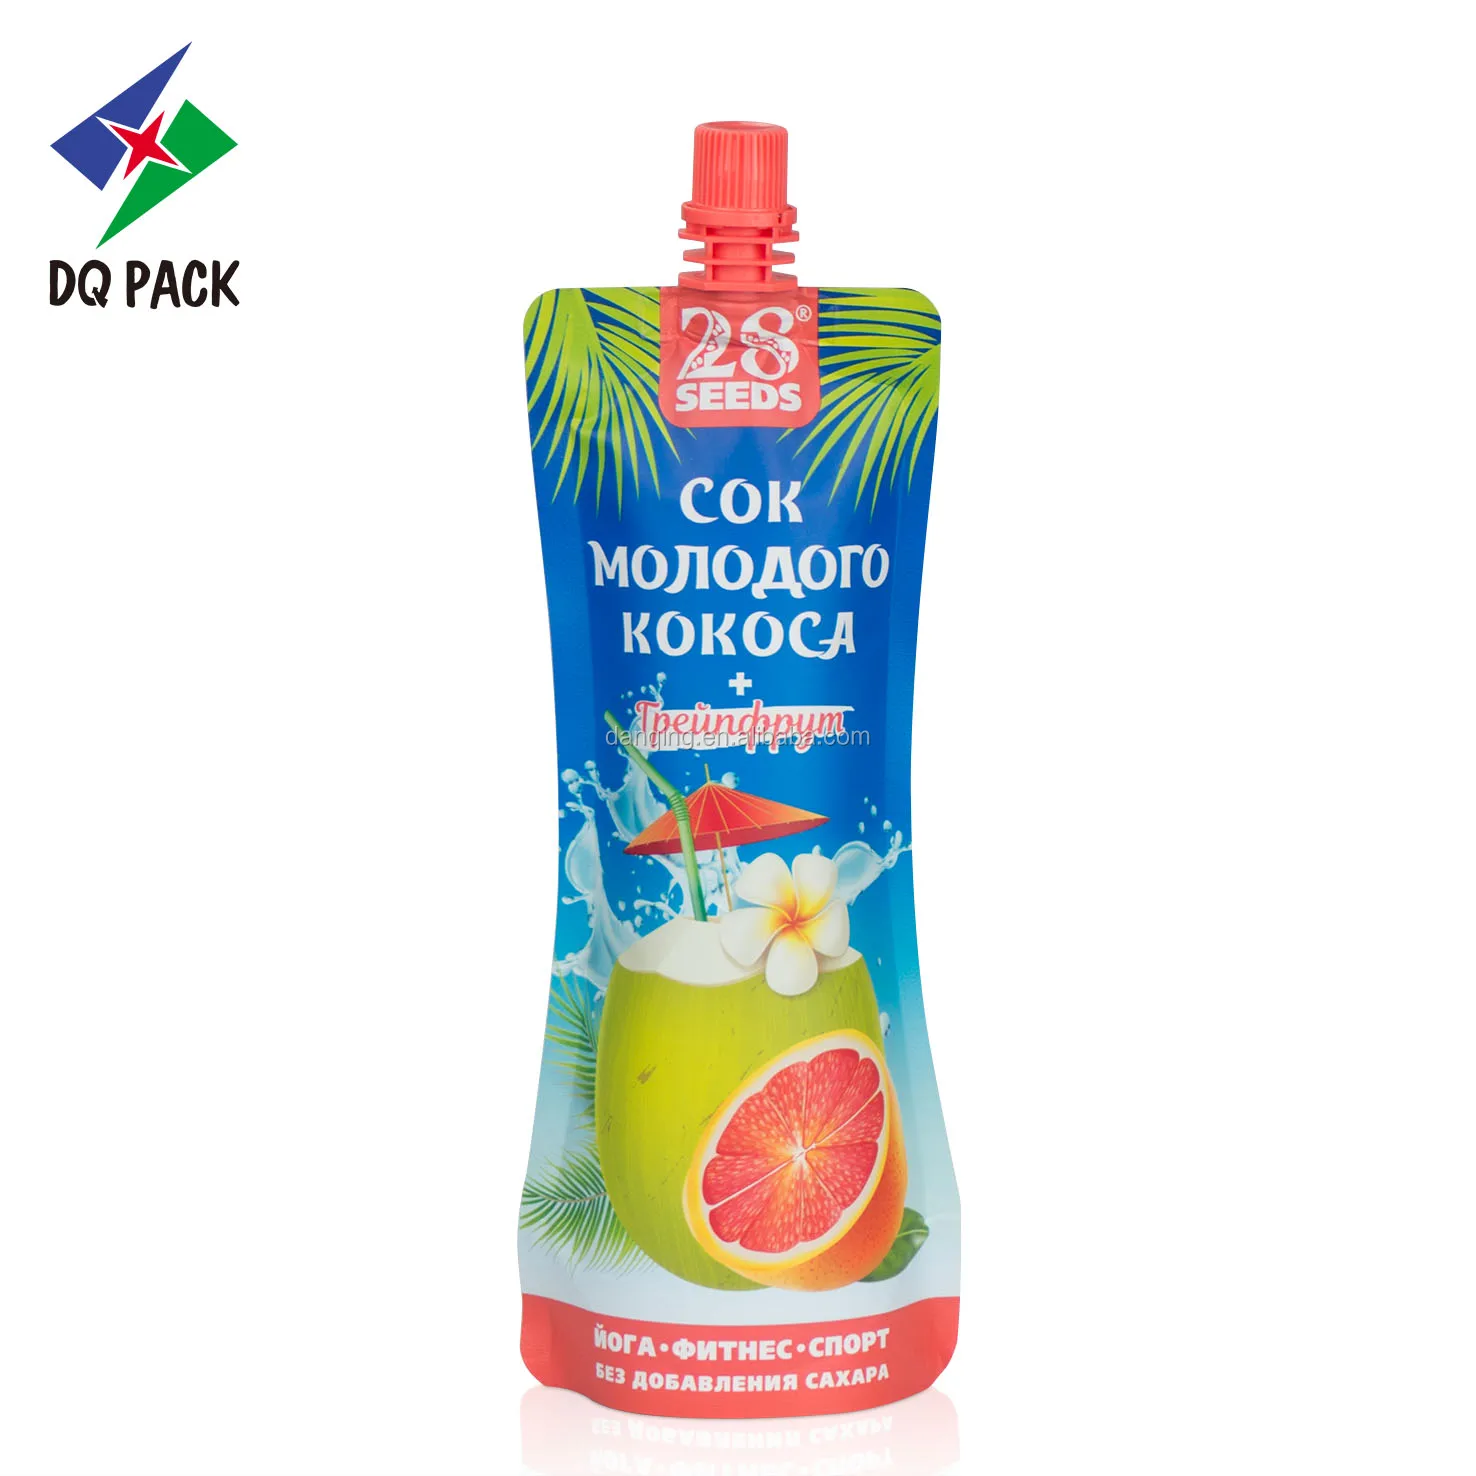 DQ PACK CHINA plastic flexible bag other packaging materials packing supplier stand up detergent liquid spout bag